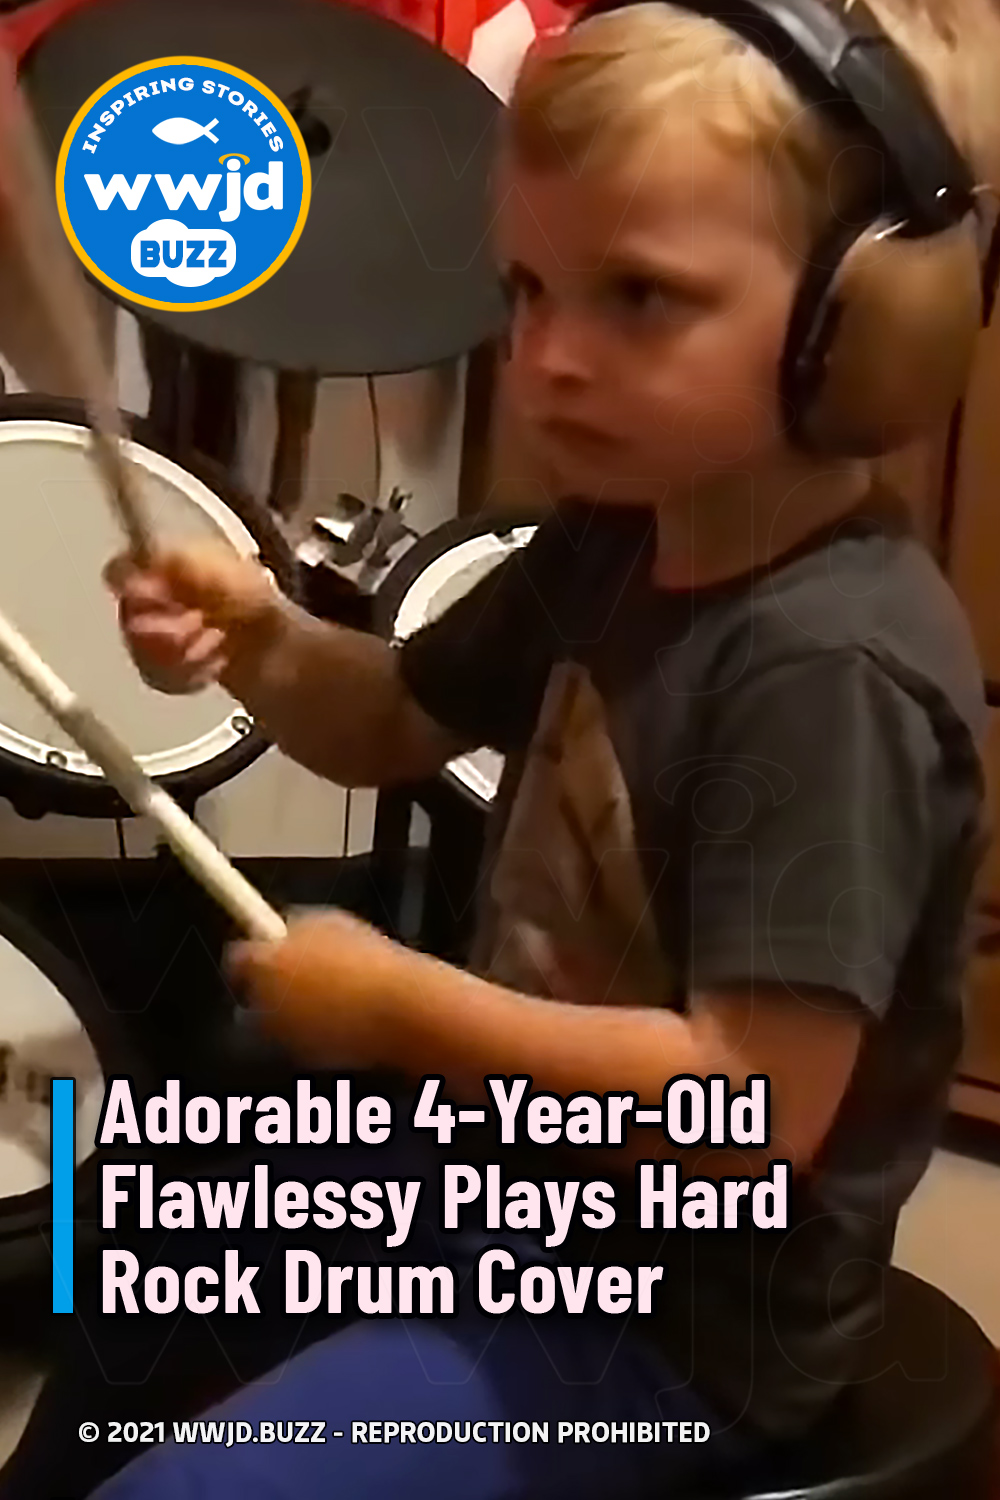 Adorable 4-Year-Old Flawlessy Plays Hard Rock Drum Cover